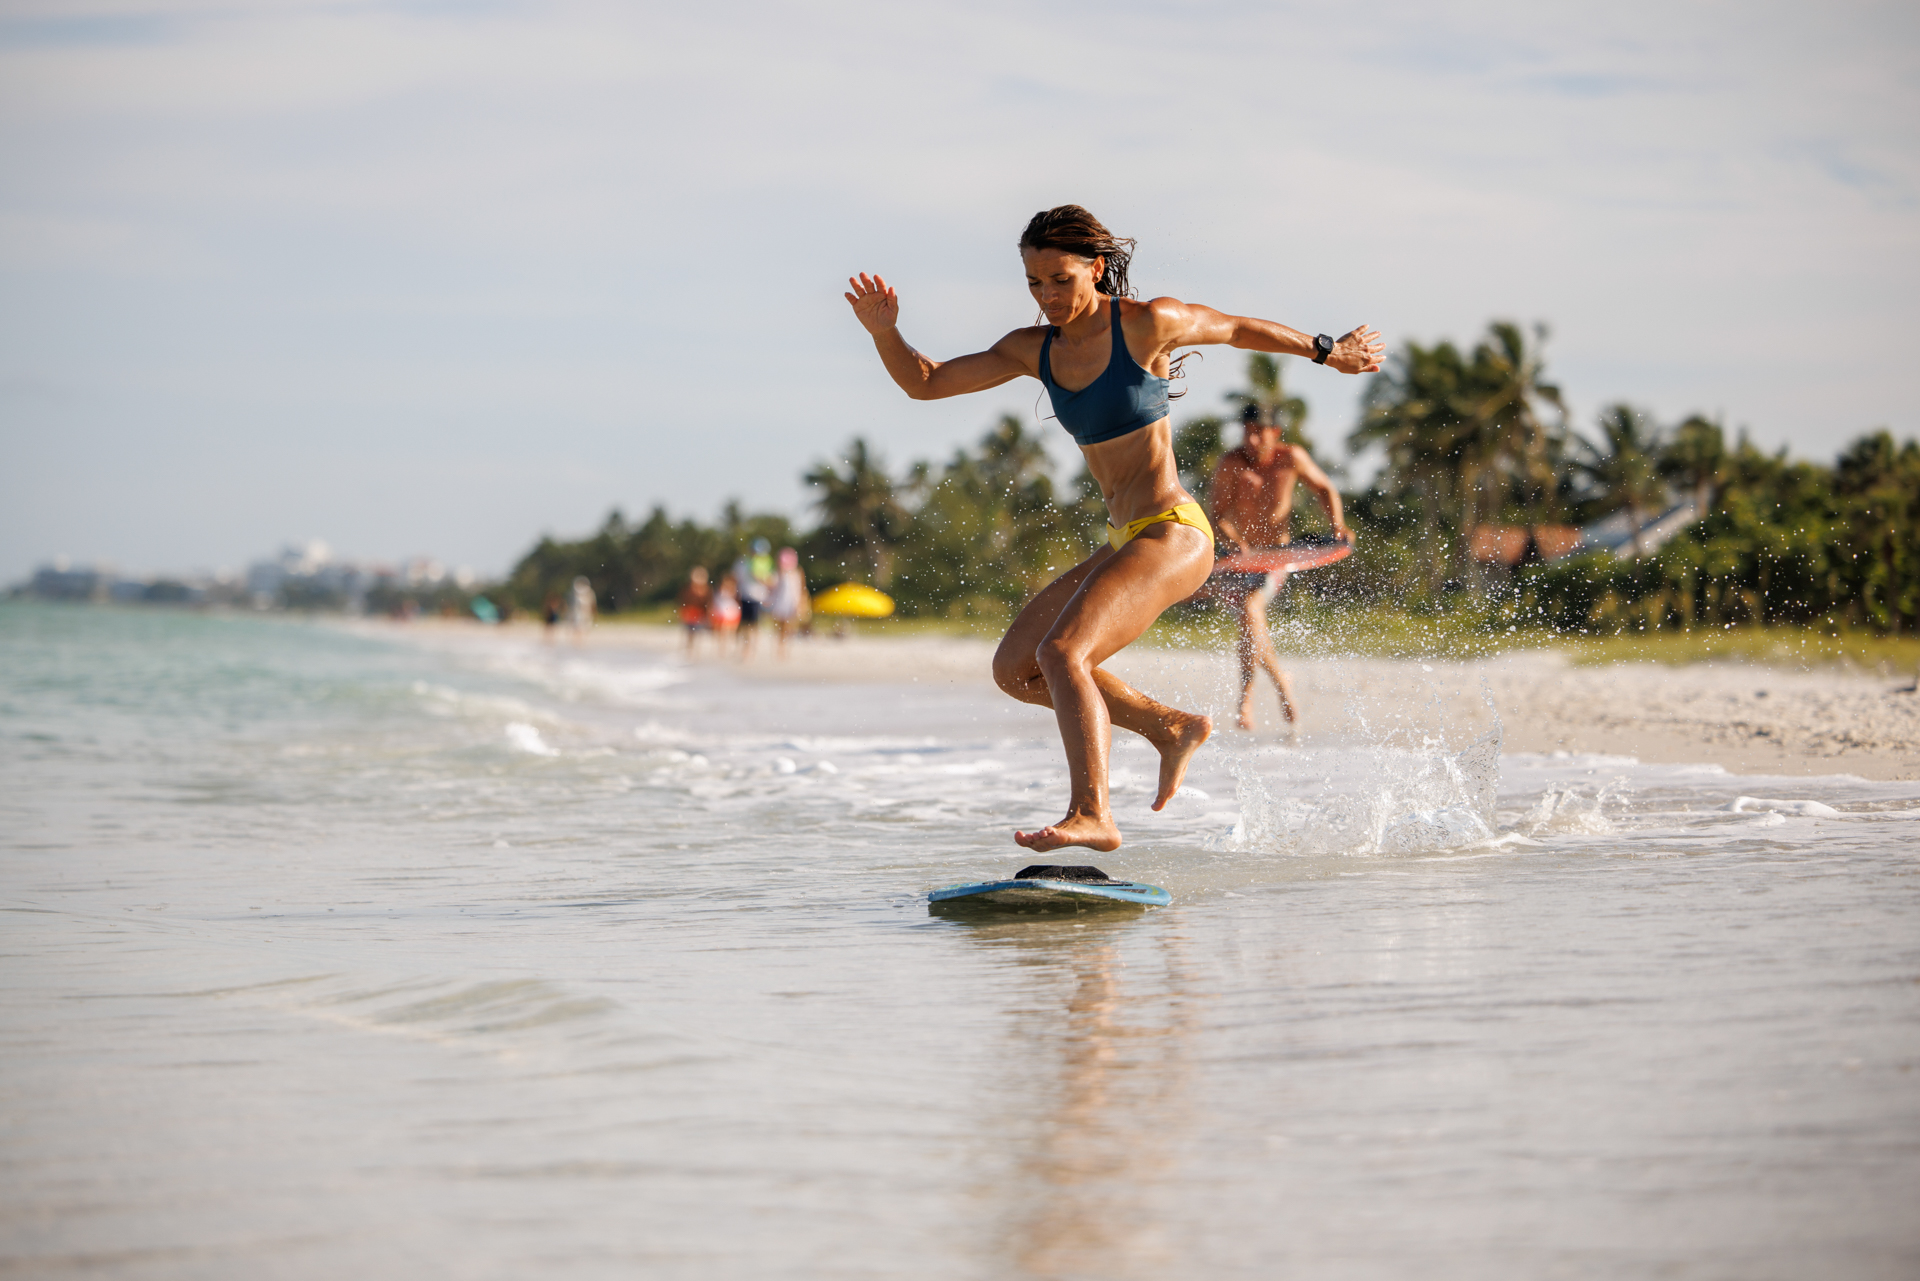 Surf and Skim boarding